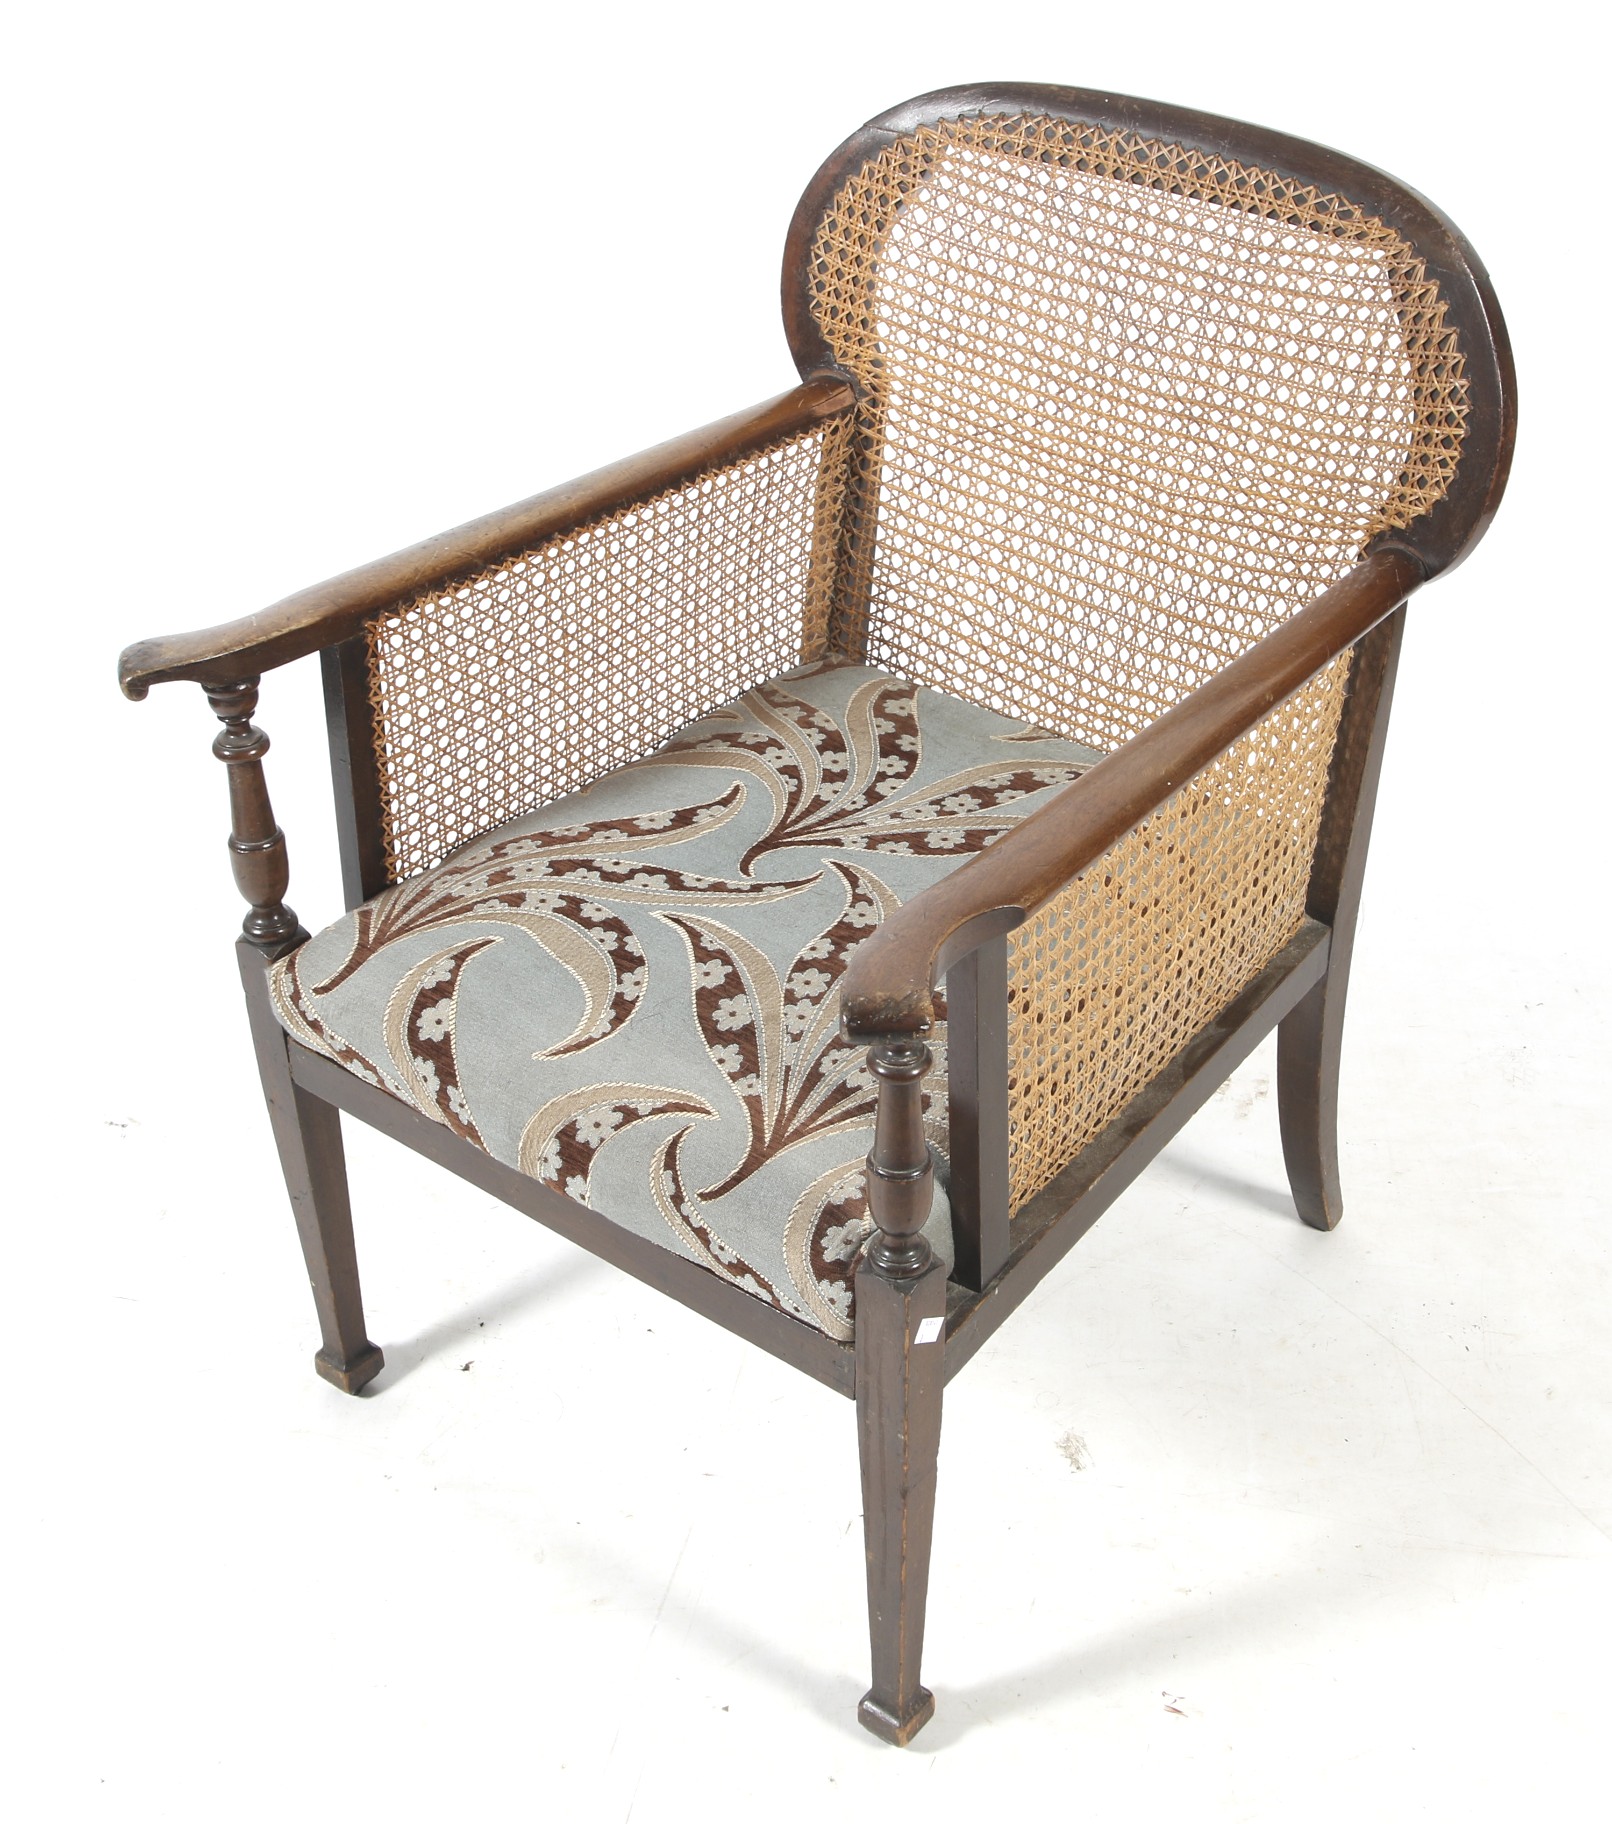 An Edwardian mahogany and cane bergere armchair.